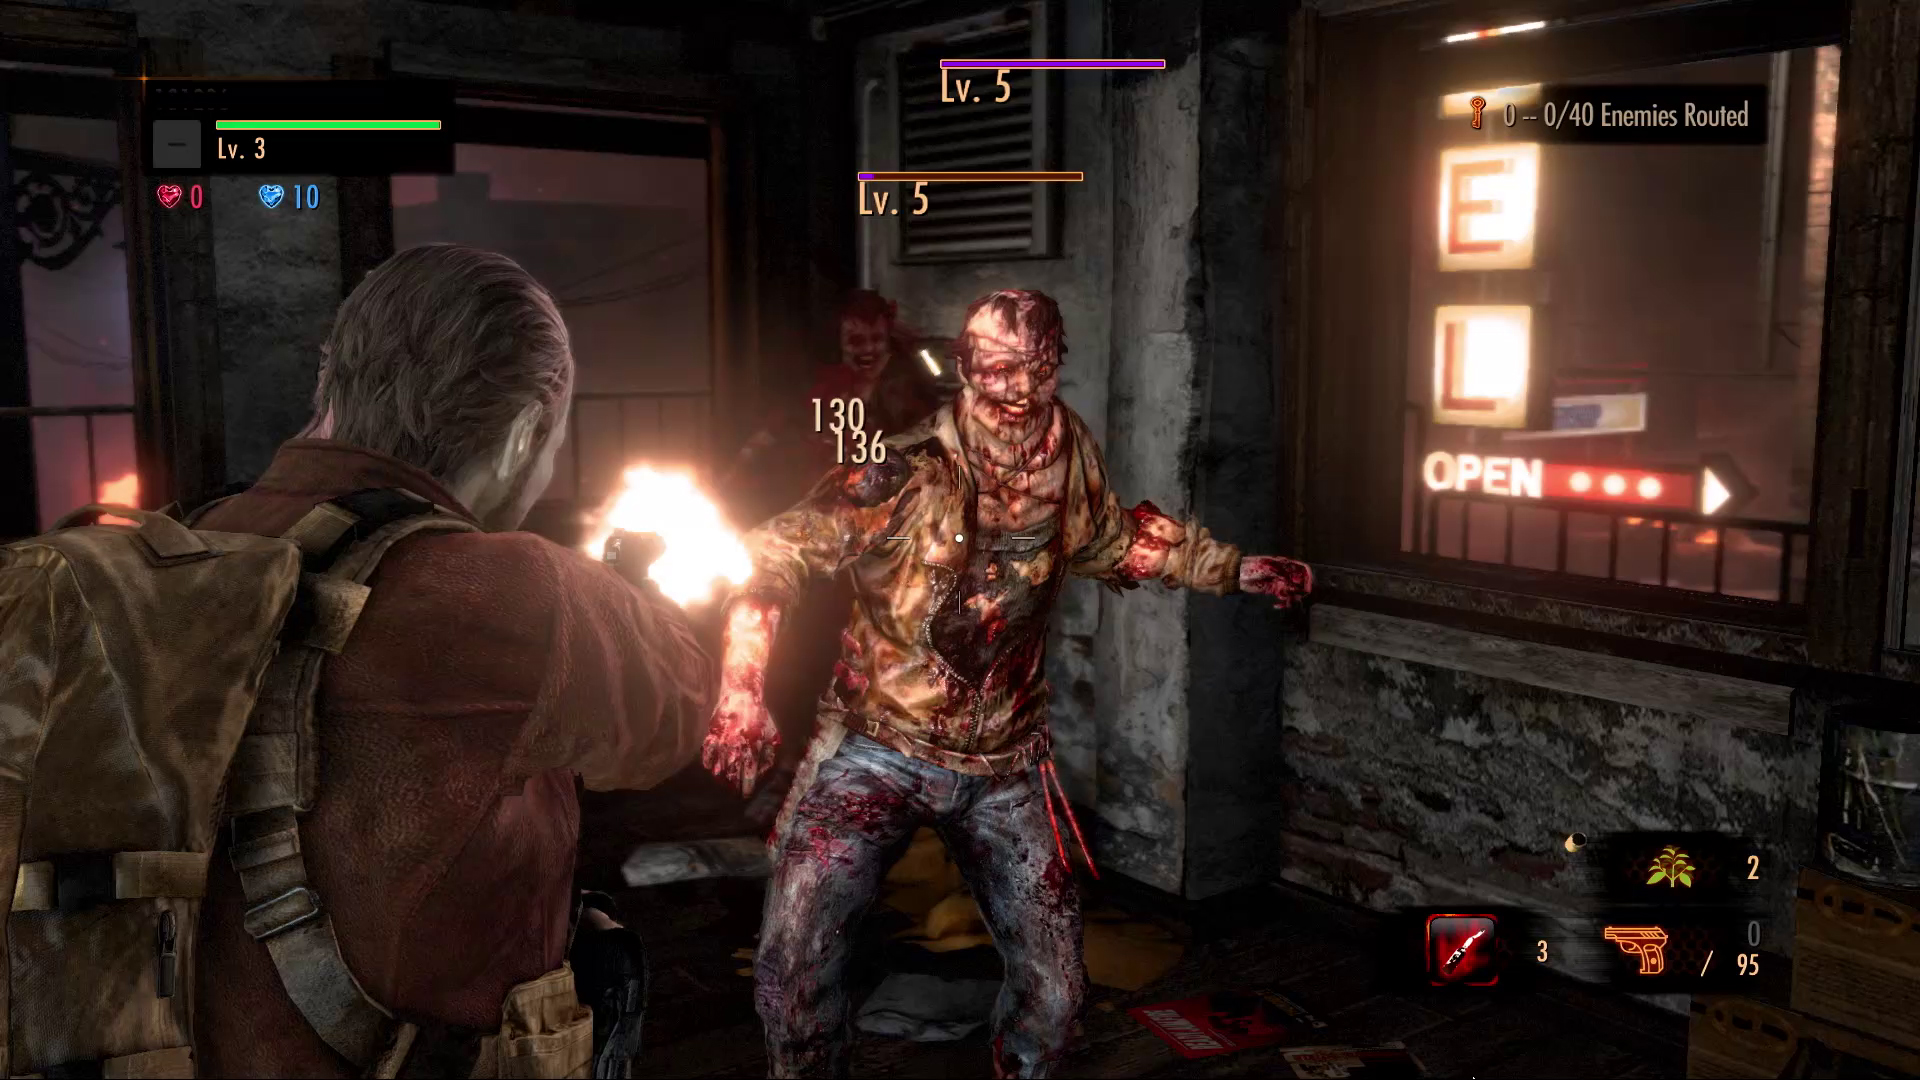 Resident Evil: Revelations 2 Pics, Video Game Collection